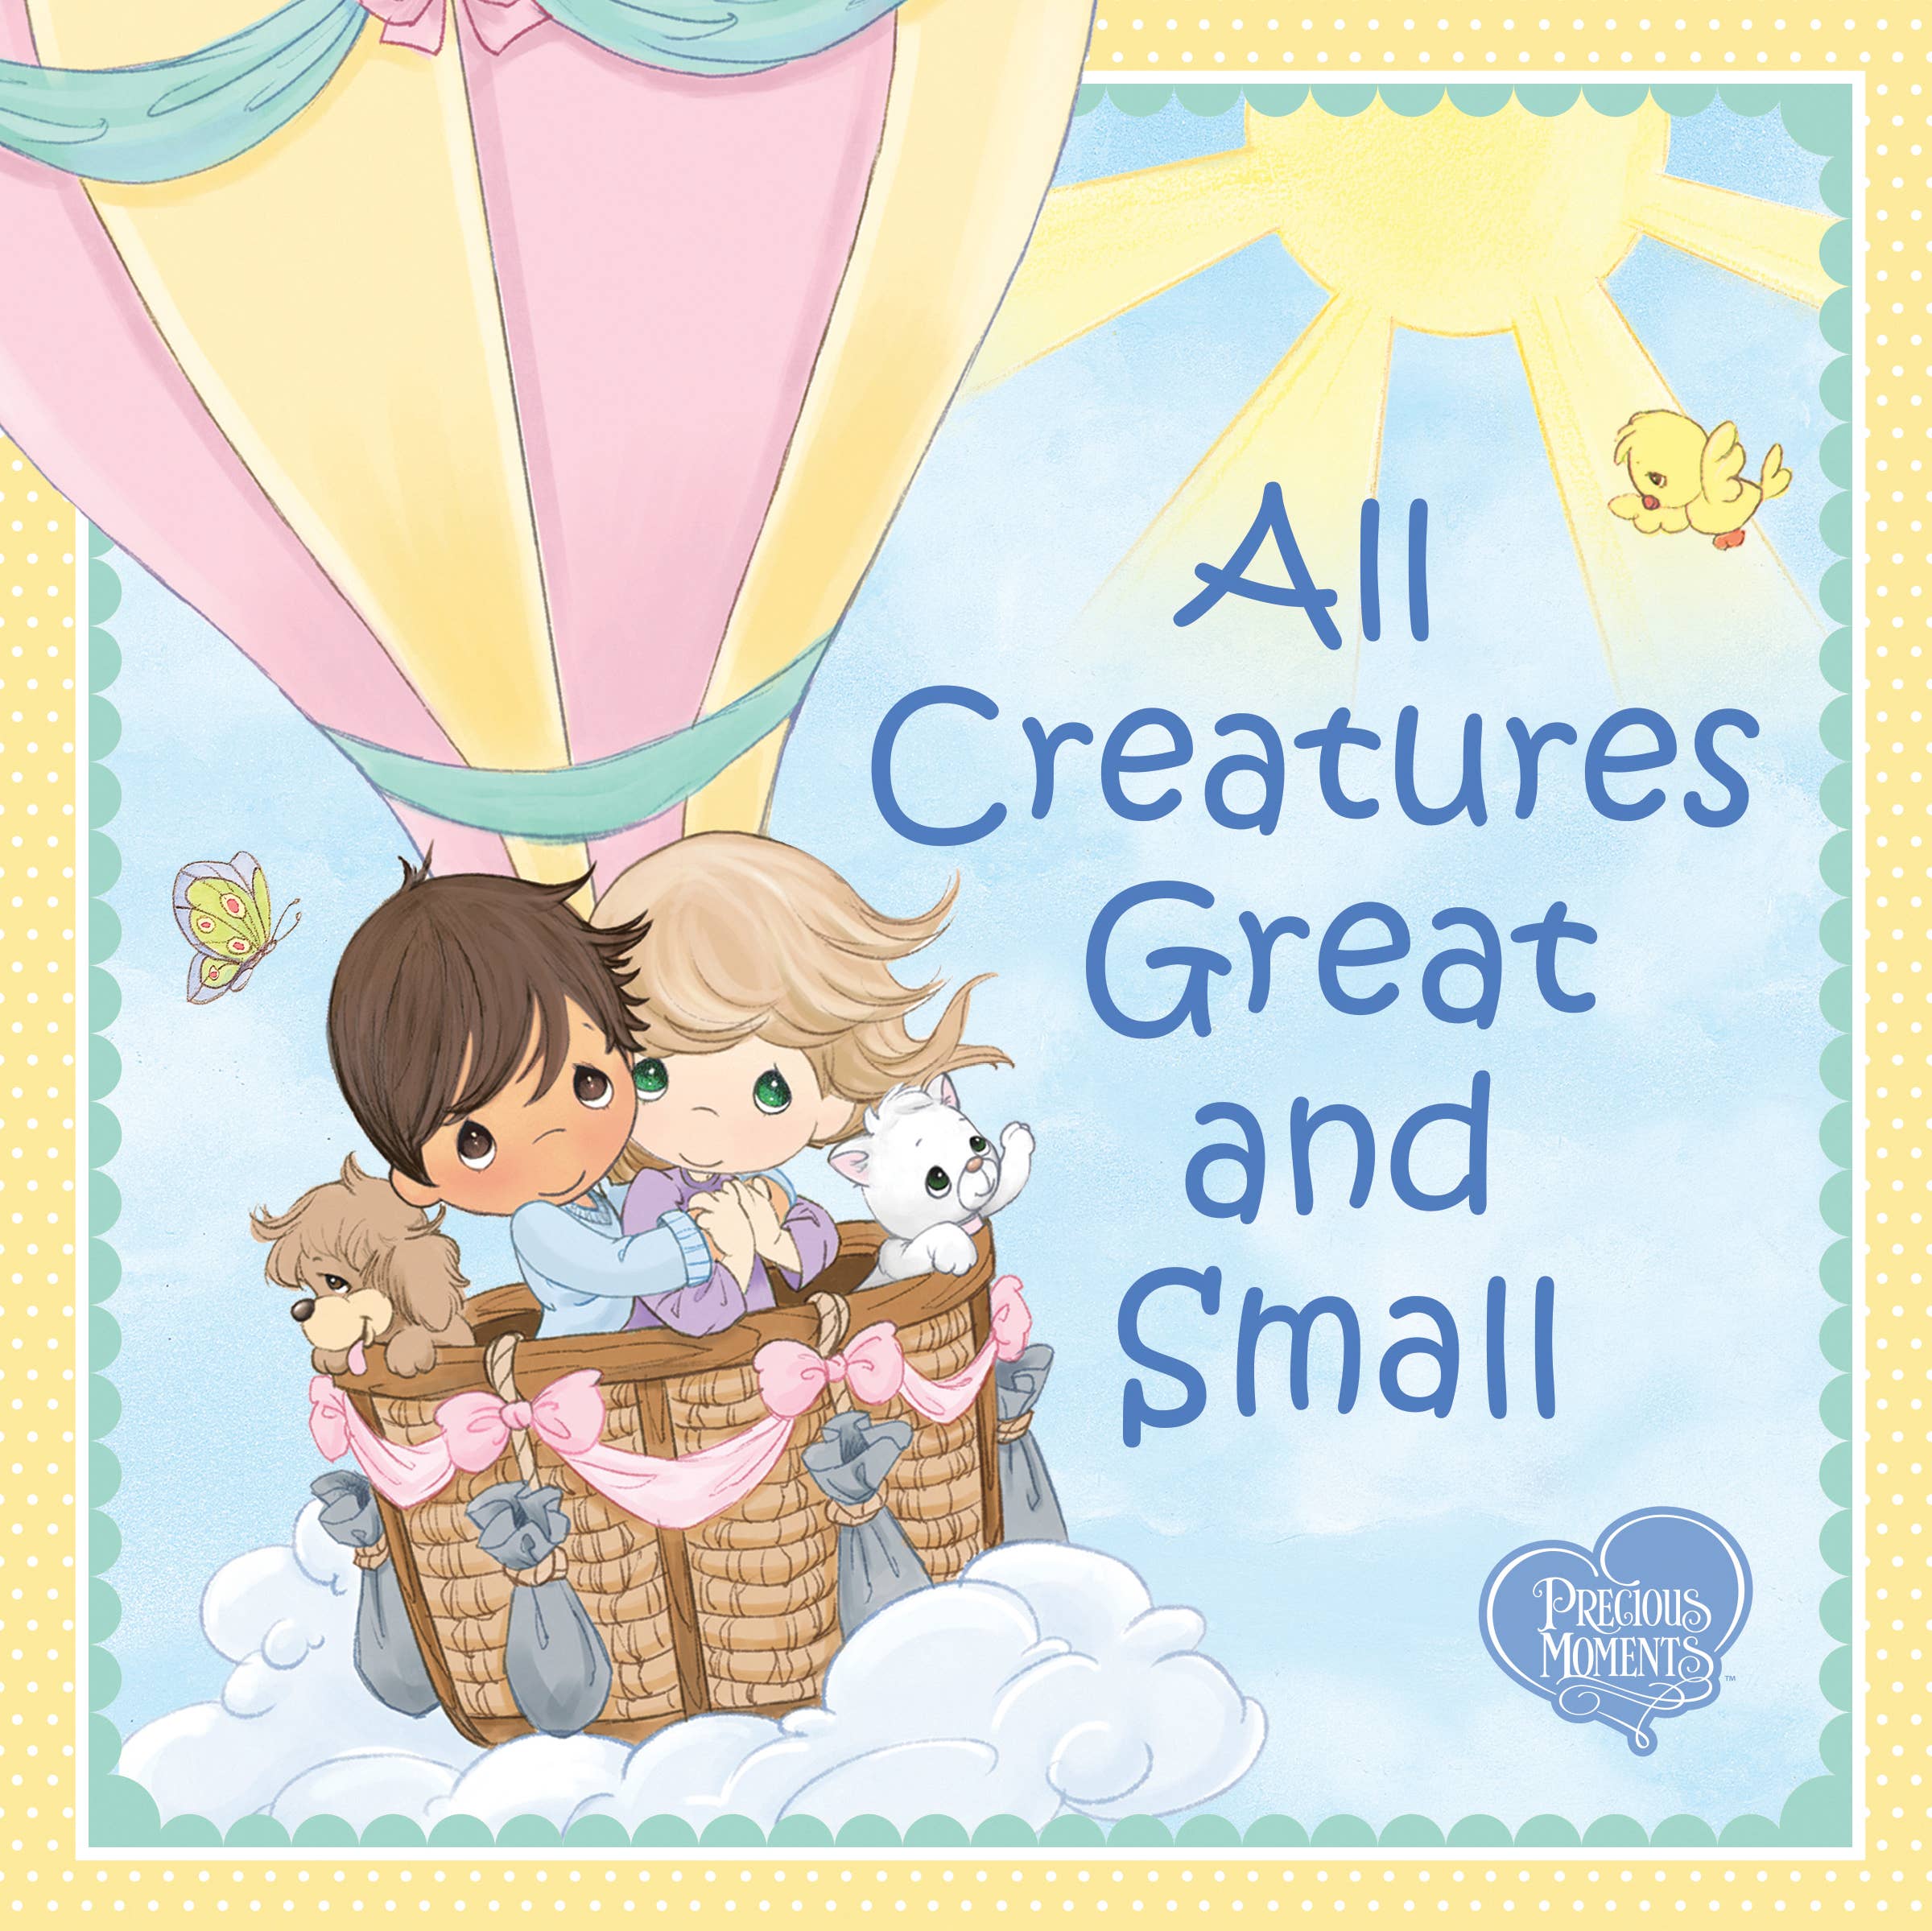 Book: All Creatures Great and Small (Precious Moments hardcover)